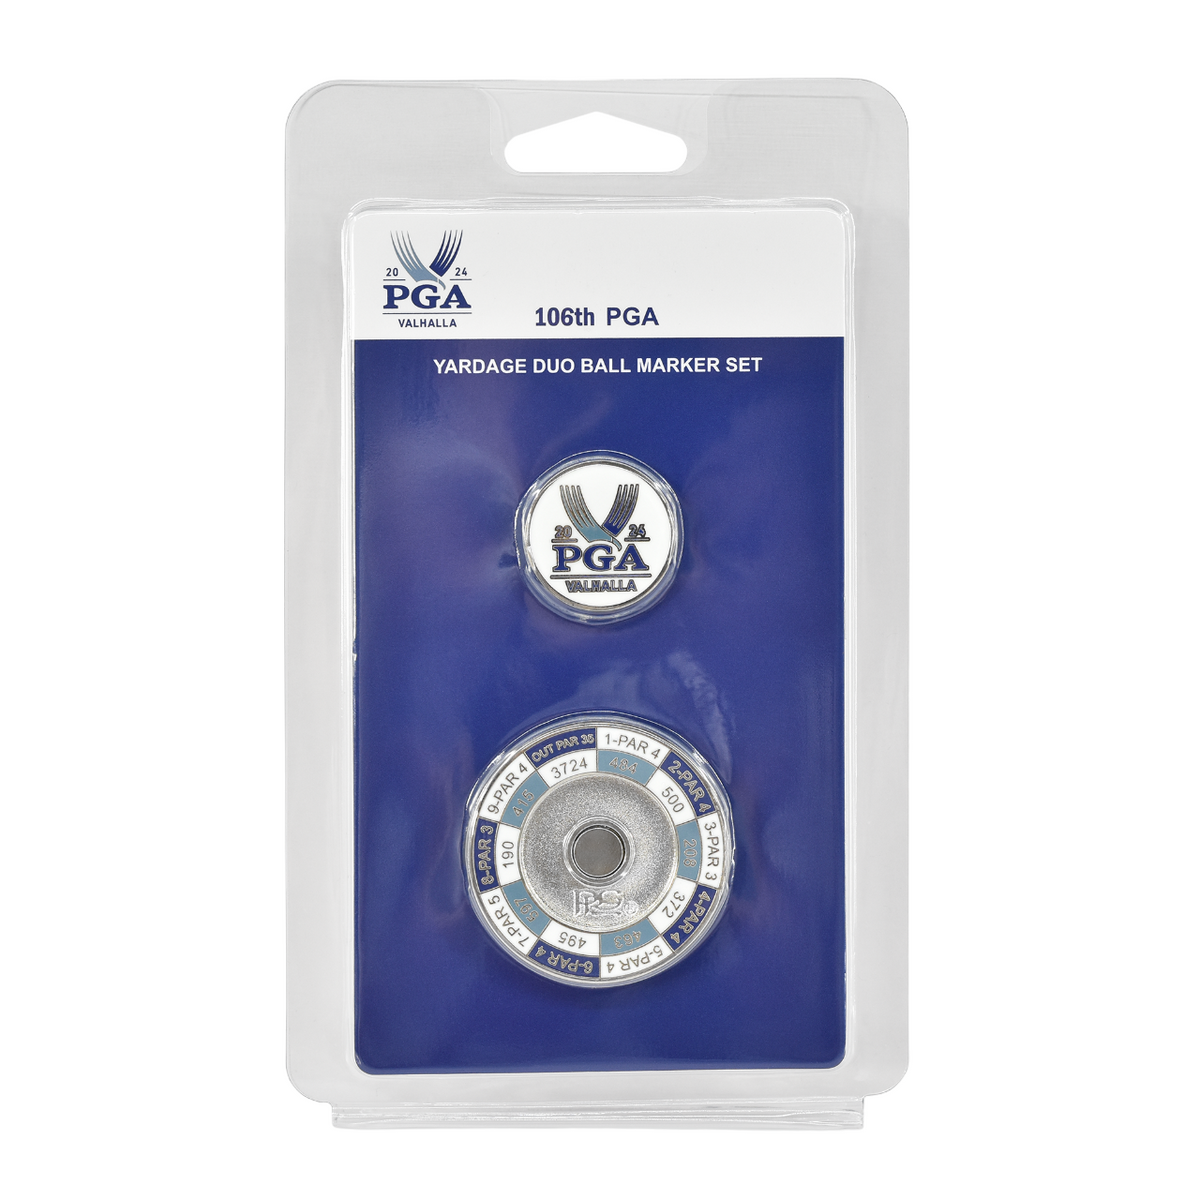 PRG Americas 2024 PGA Championship Duo Yardage Ball Marker - Packaged View